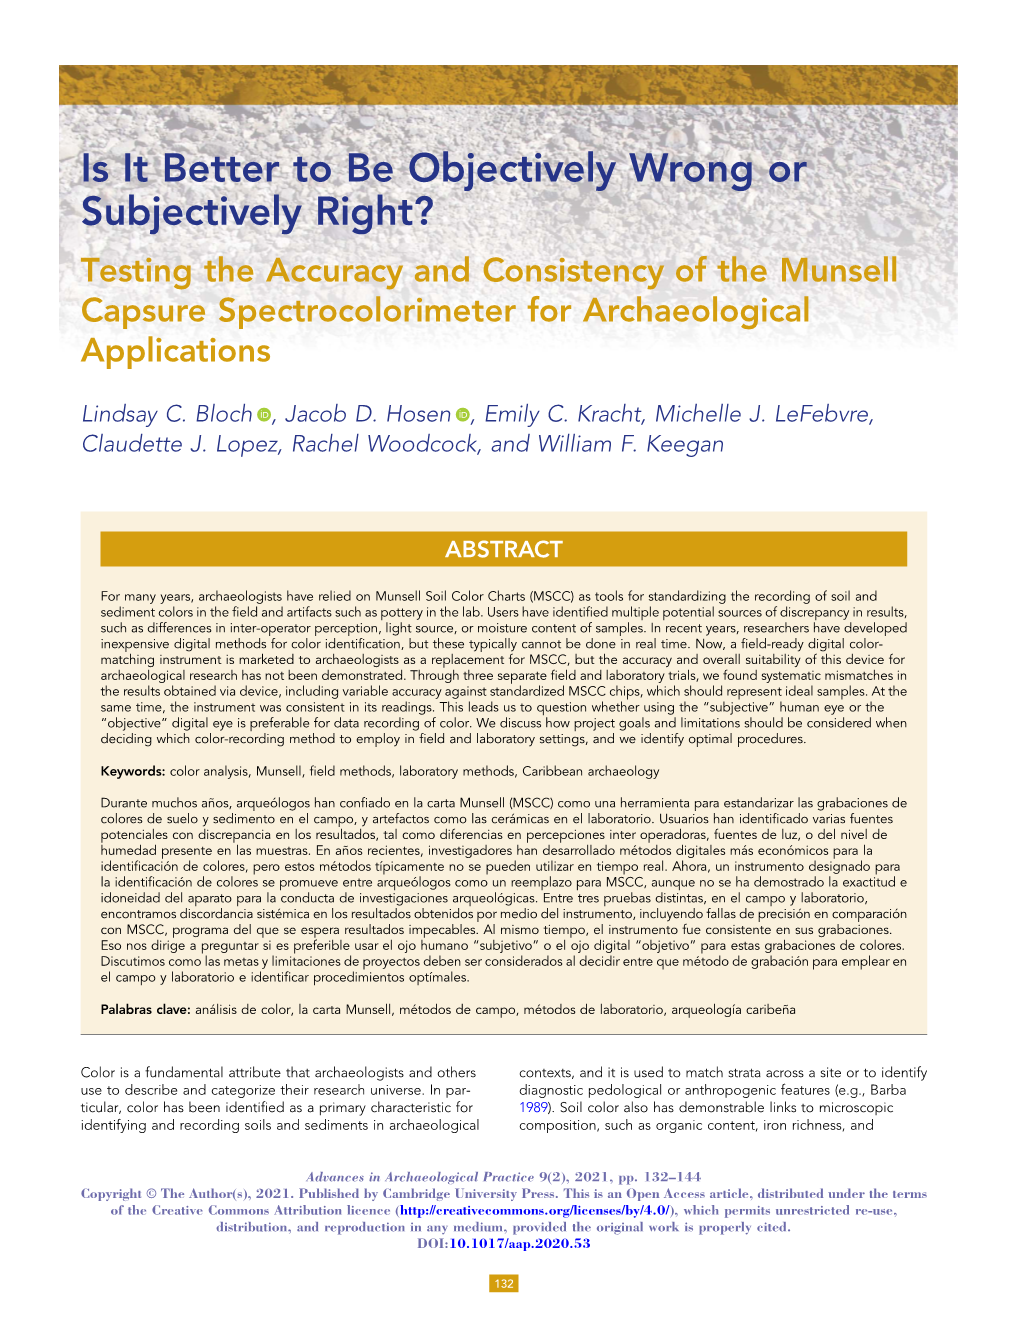 Is It Better to Be Objectively Wrong Or Subjectively Right? Testing The